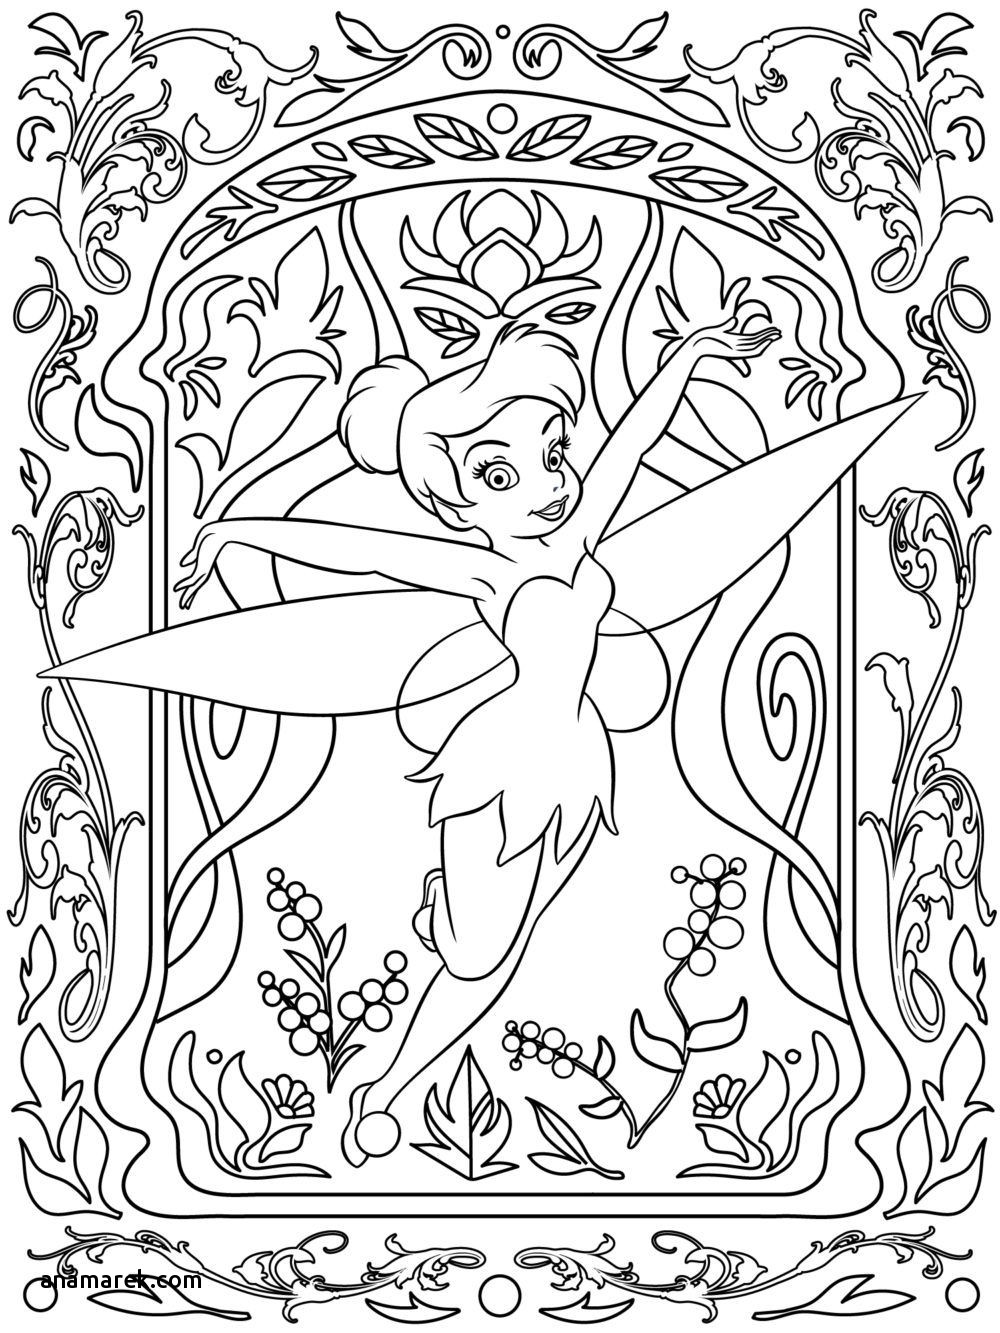 Free Disney Coloring Pages For Adults